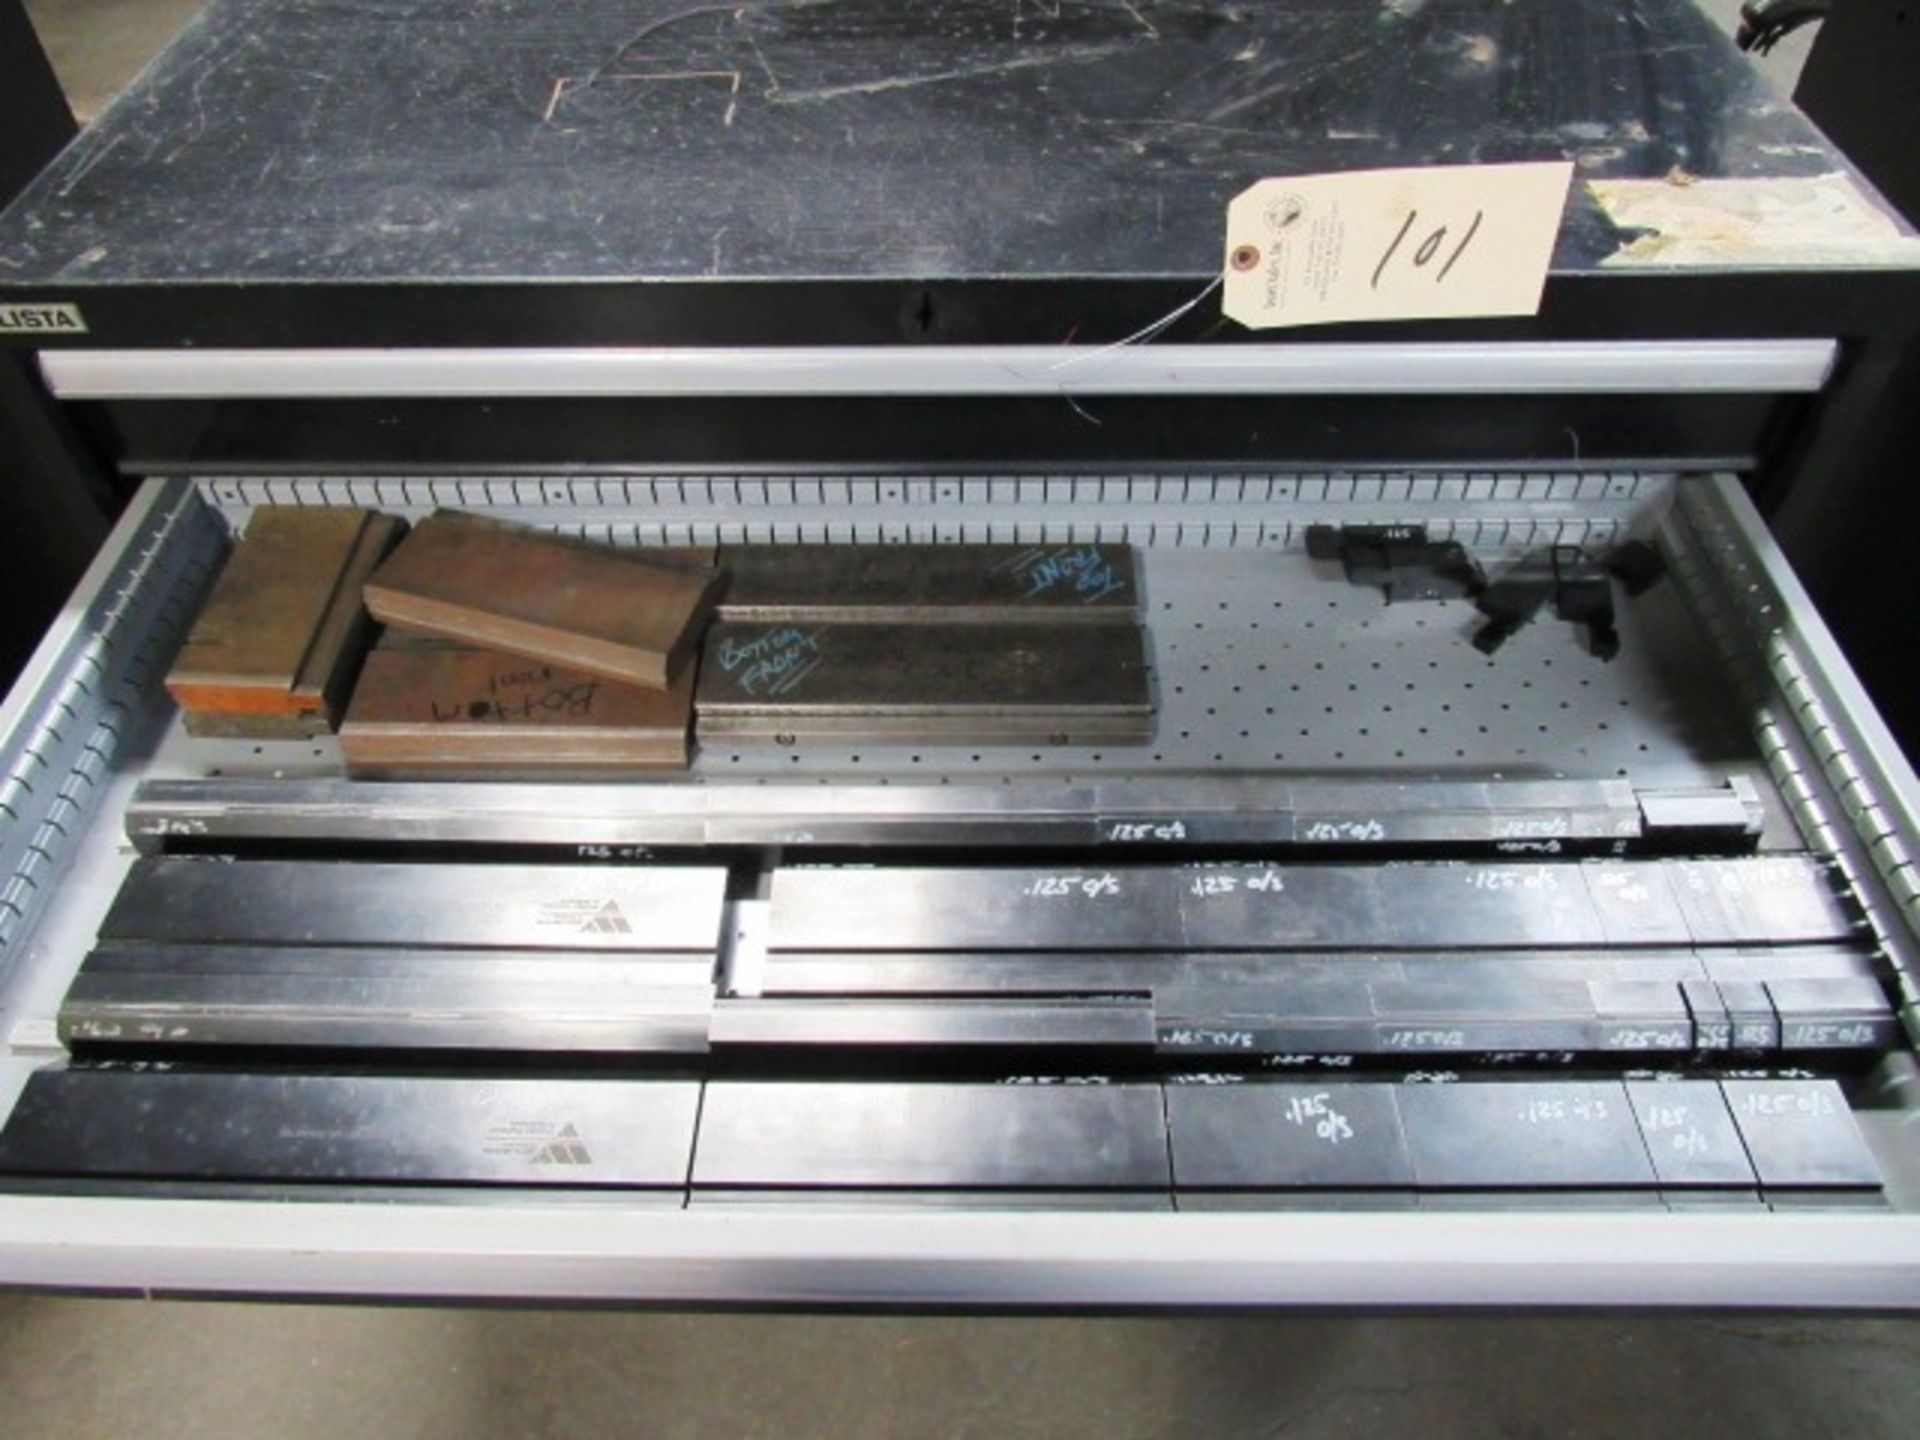 Lista 5 Drawer Cabinet with Press Brake Dies - Image 6 of 7